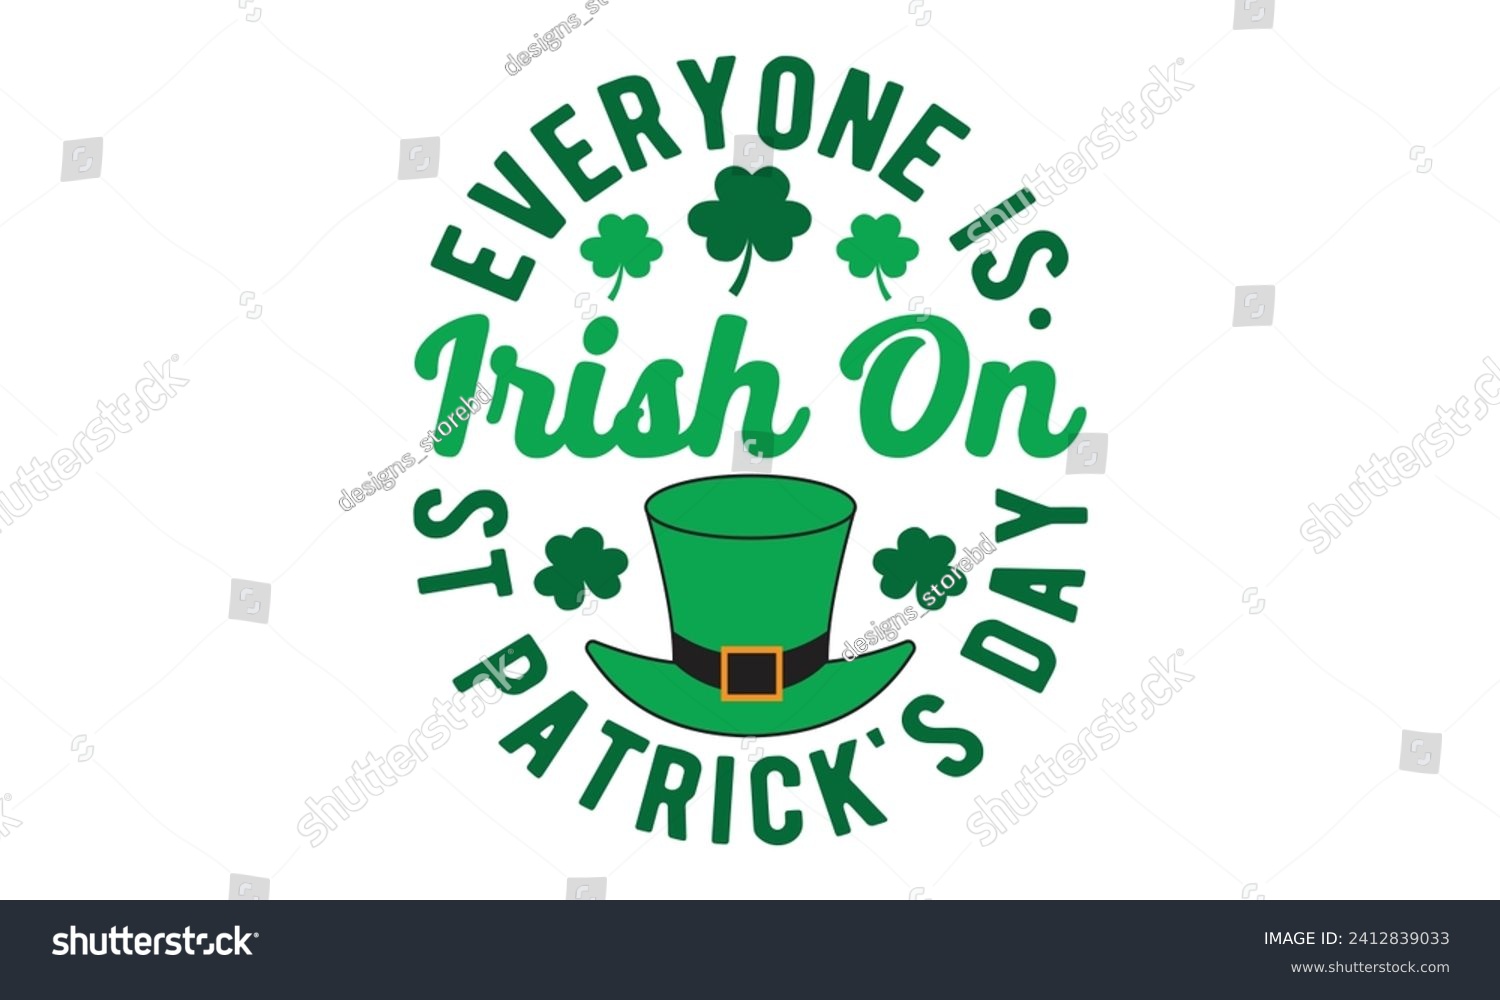 SVG of veryone is irish on st patrick's,St. Patrick's Day,St. Patrick's Day t shirt,Retro St. Patricks,Shamrock Svg,Happy Happy St. Patrick's Day typography t shirt quotes,Cricut Cut Files,Silhouette,vector svg